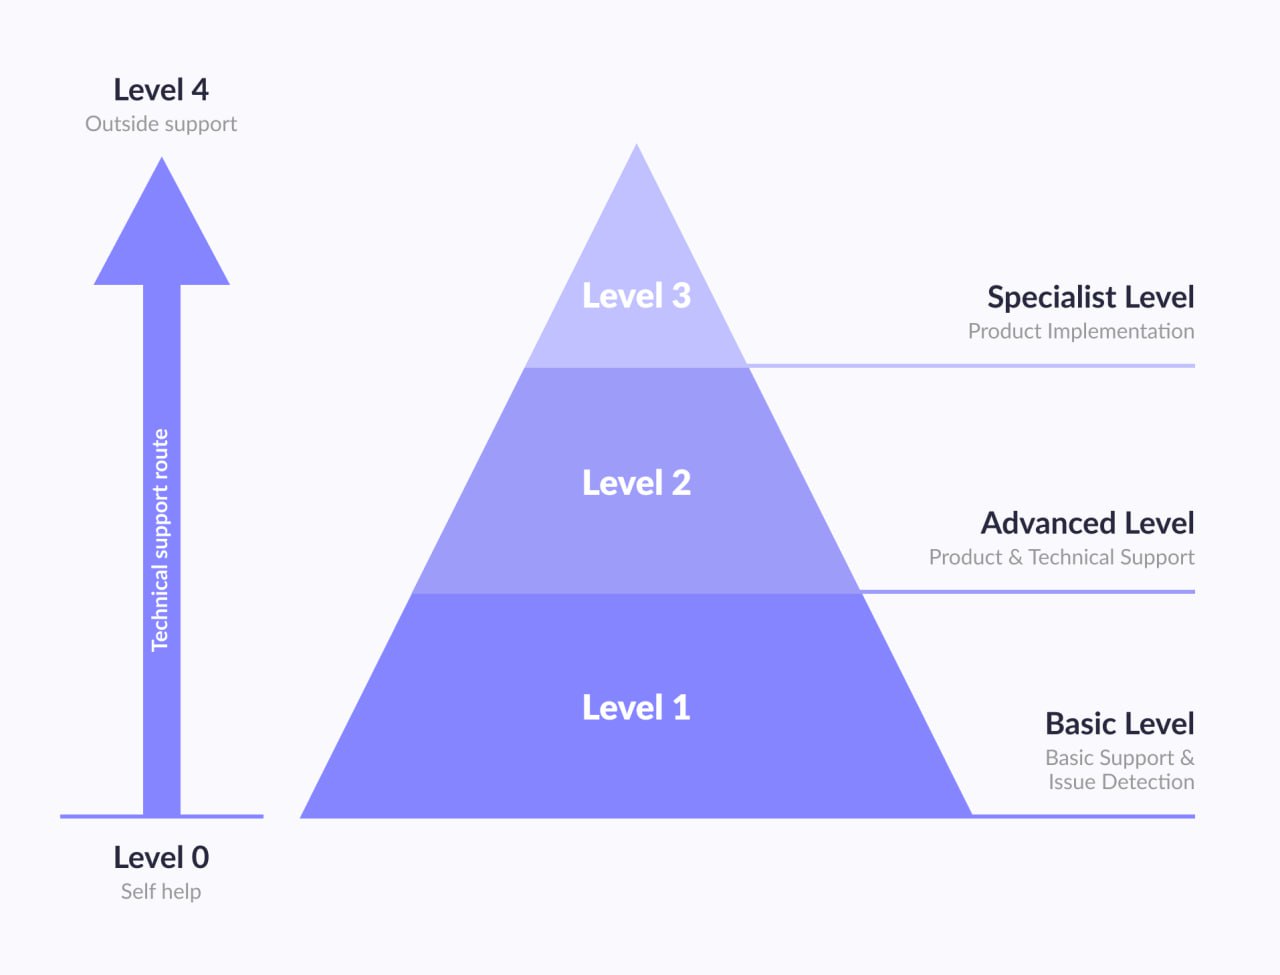 A pyramid depicting risk and risk management with three levels, symbolizing different degrees of risk and strategies to mitigate them.